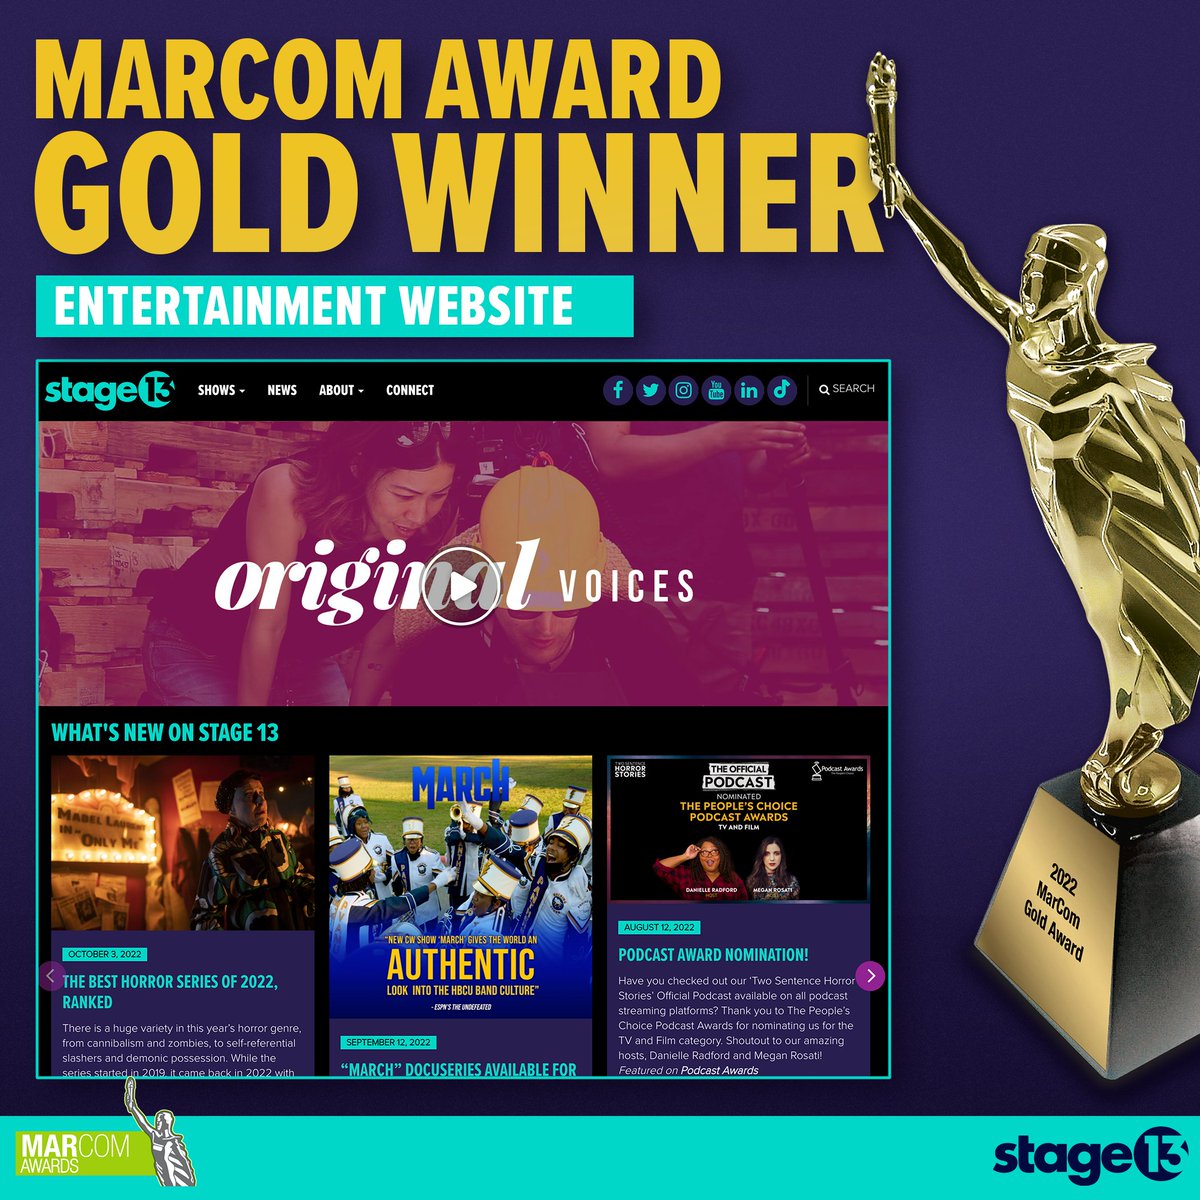 Stage 13 won a gold MarCom Award in the Entertainment Website category! Our site stage13.com has always been a one-stop shop for fans to dive deep into our diverse content and get the latest Stage 13 news, and we're thankful to the @marcom_awards for this recognition!